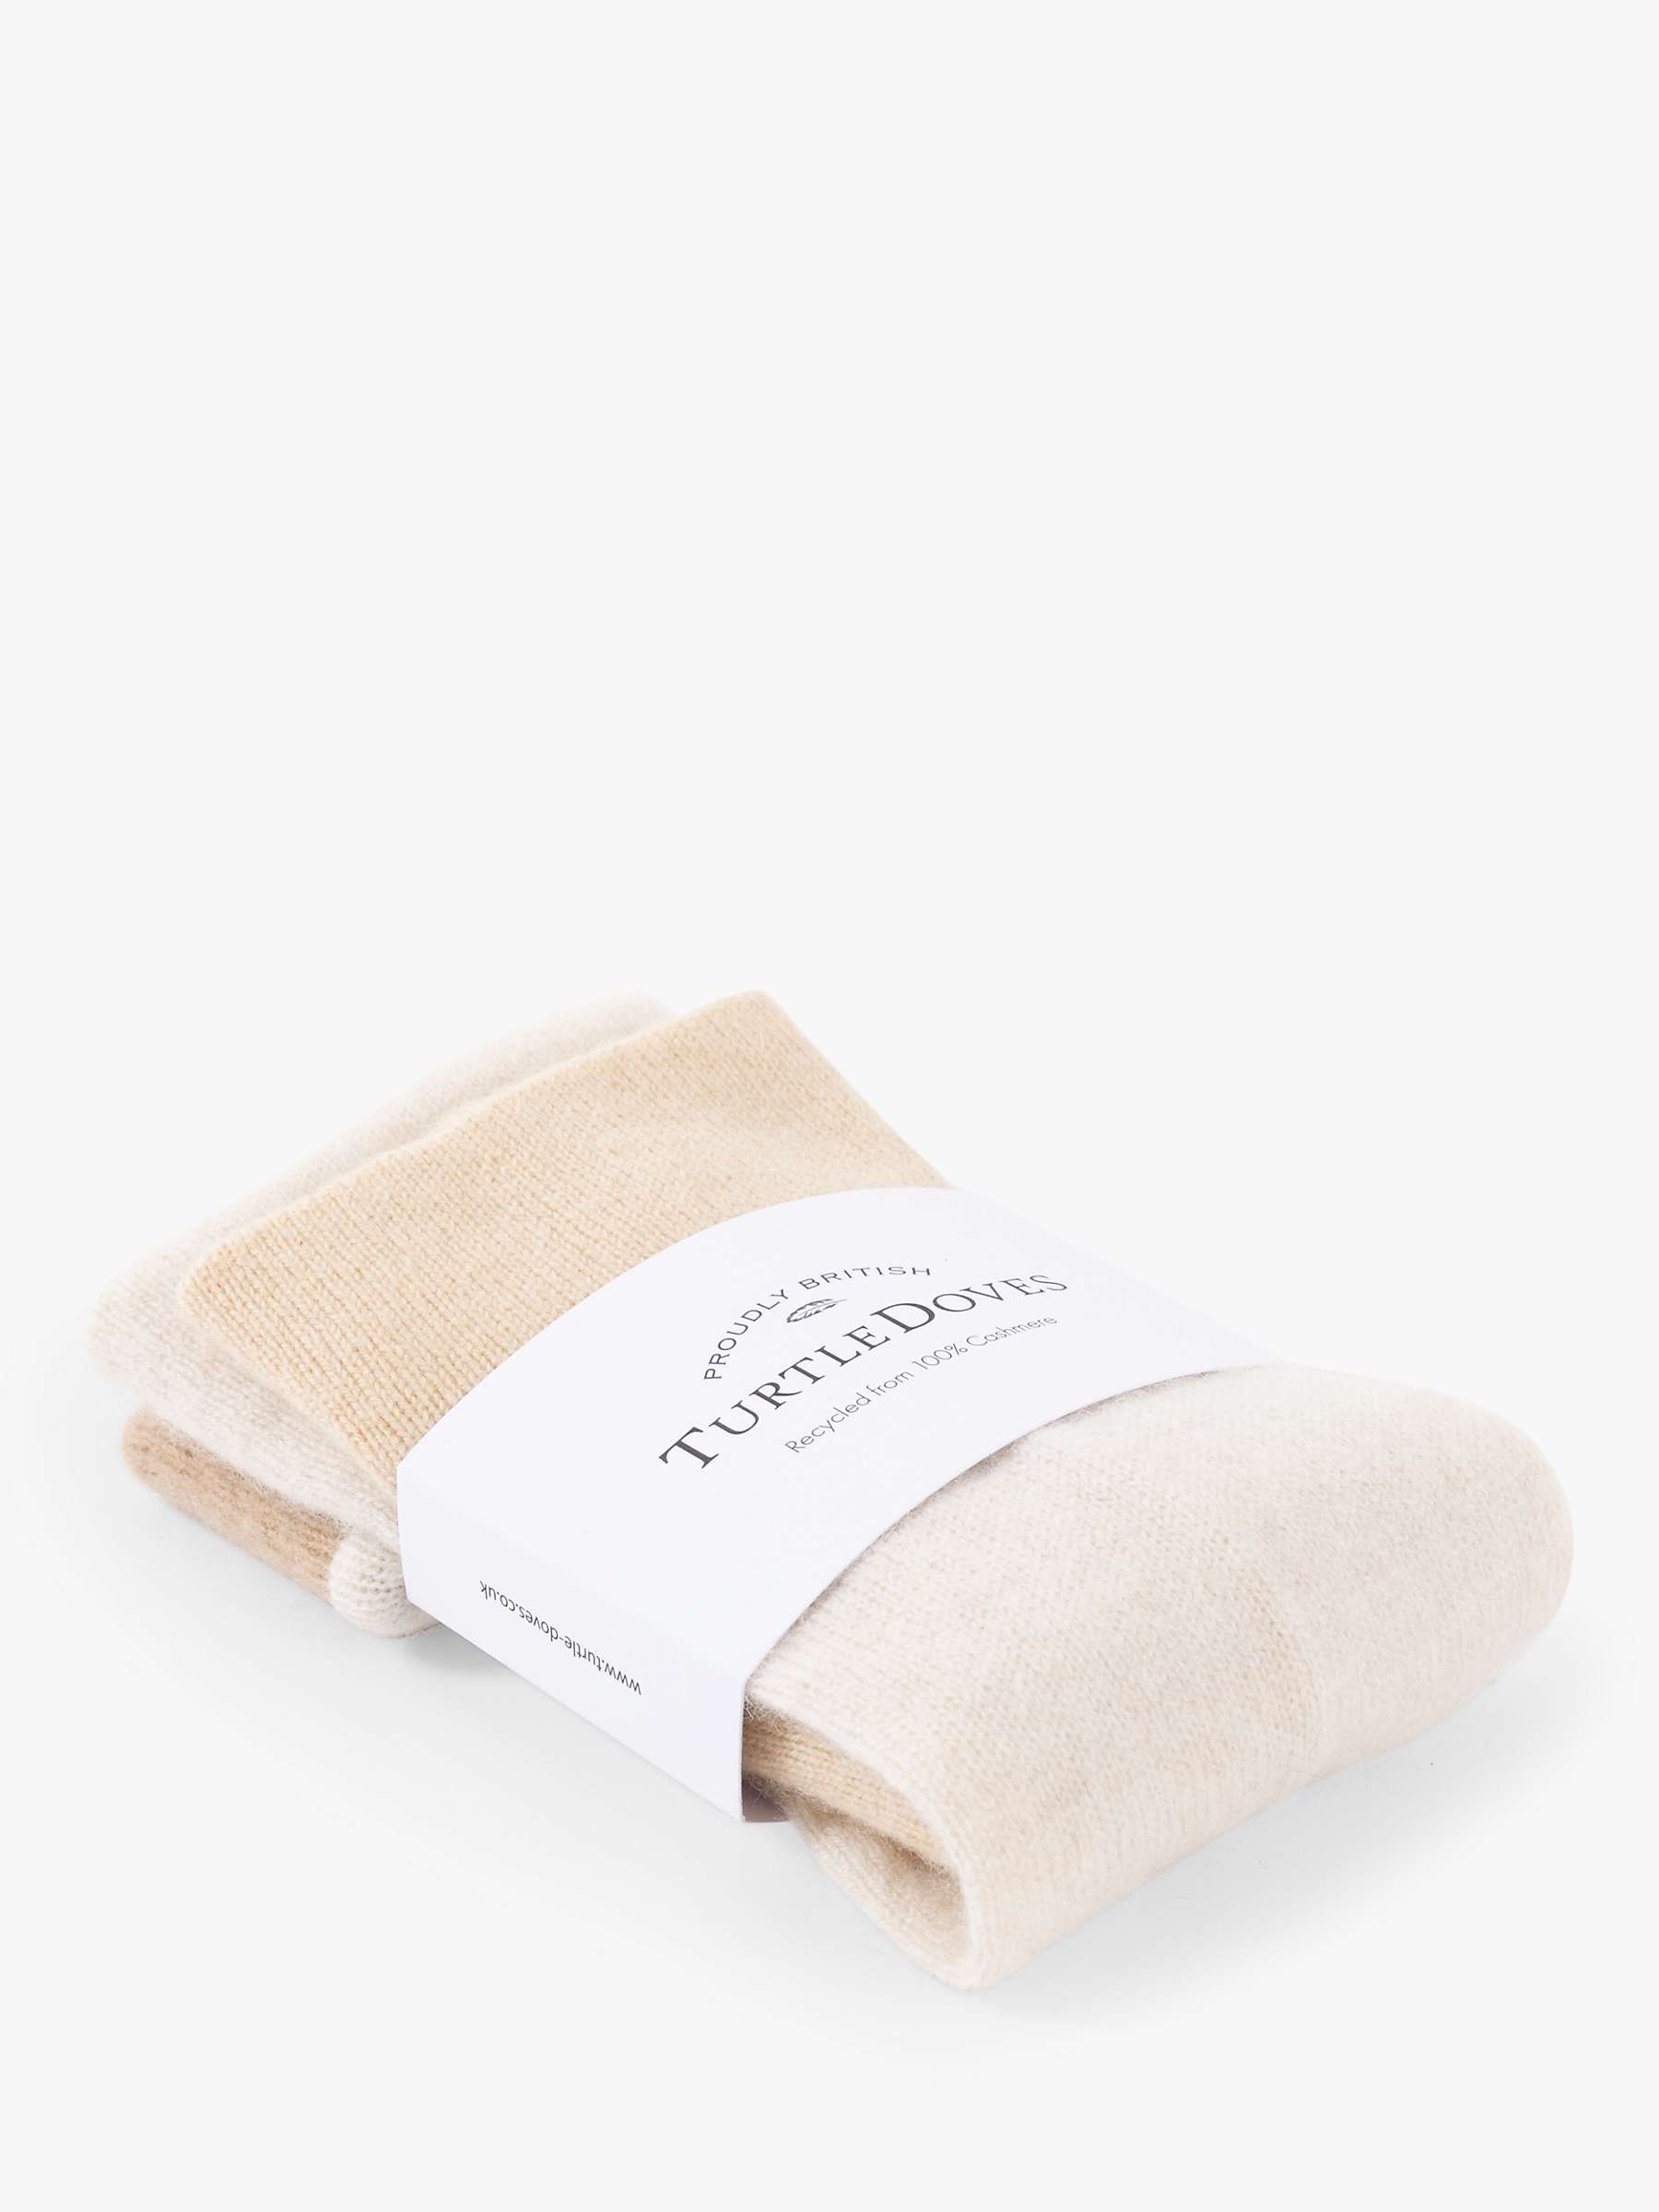 Buy Celtic & Co. Recycled Cashmere Wrist Warmers Online at johnlewis.com